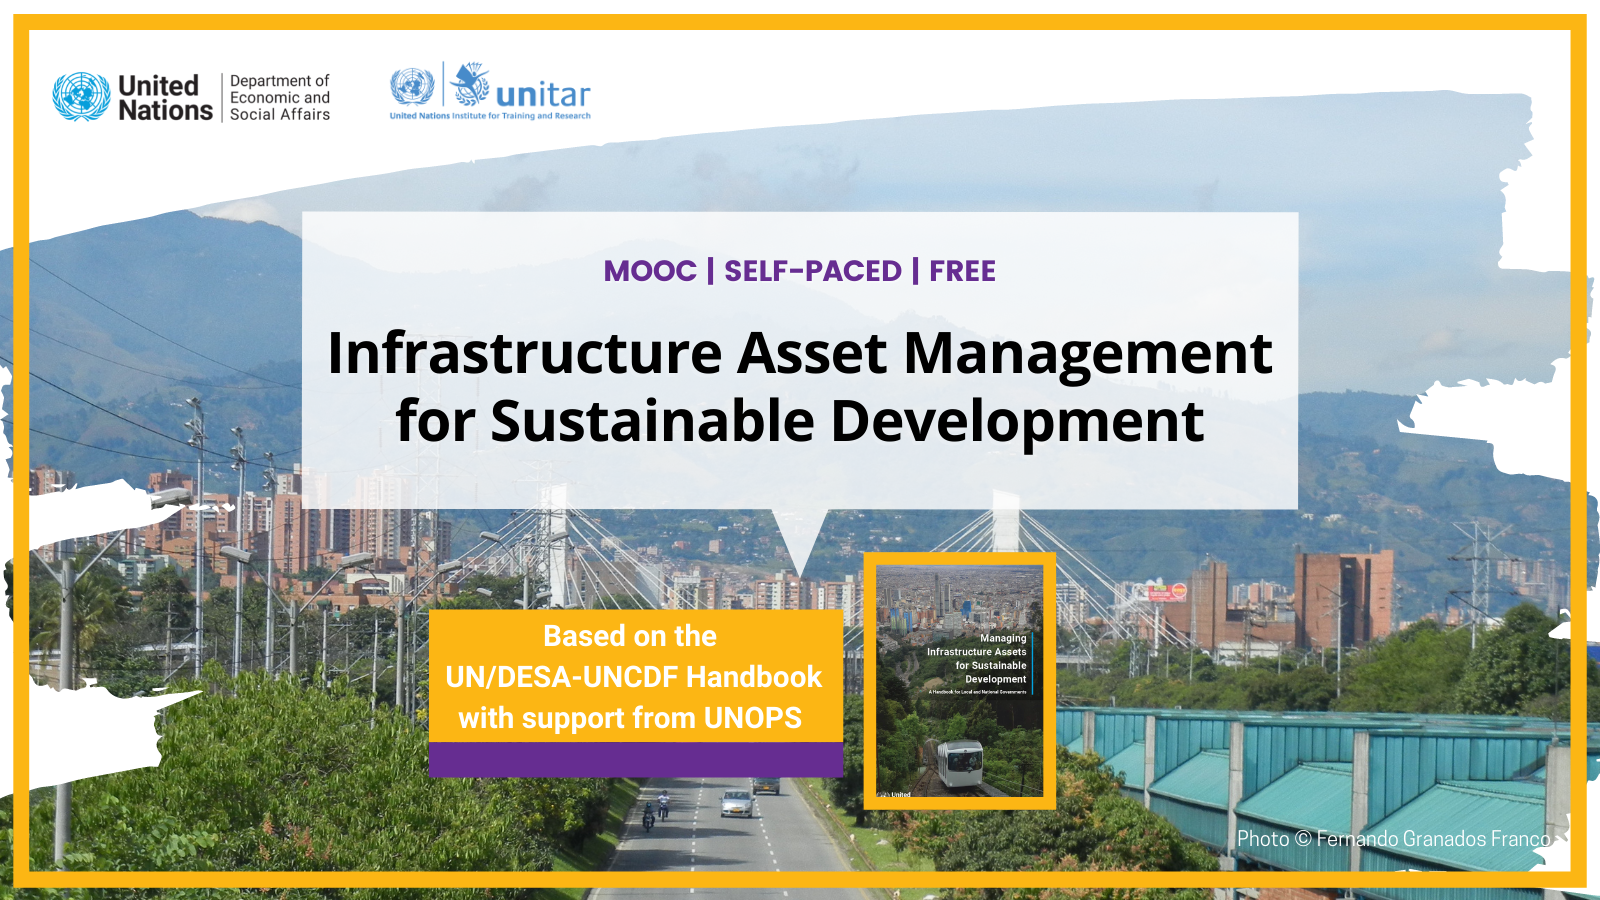 Visual card for the Massive Open Online Course on Infrastructure Asset Management by UN DESA and UNITAR, based on the UN Handbook for asset management.